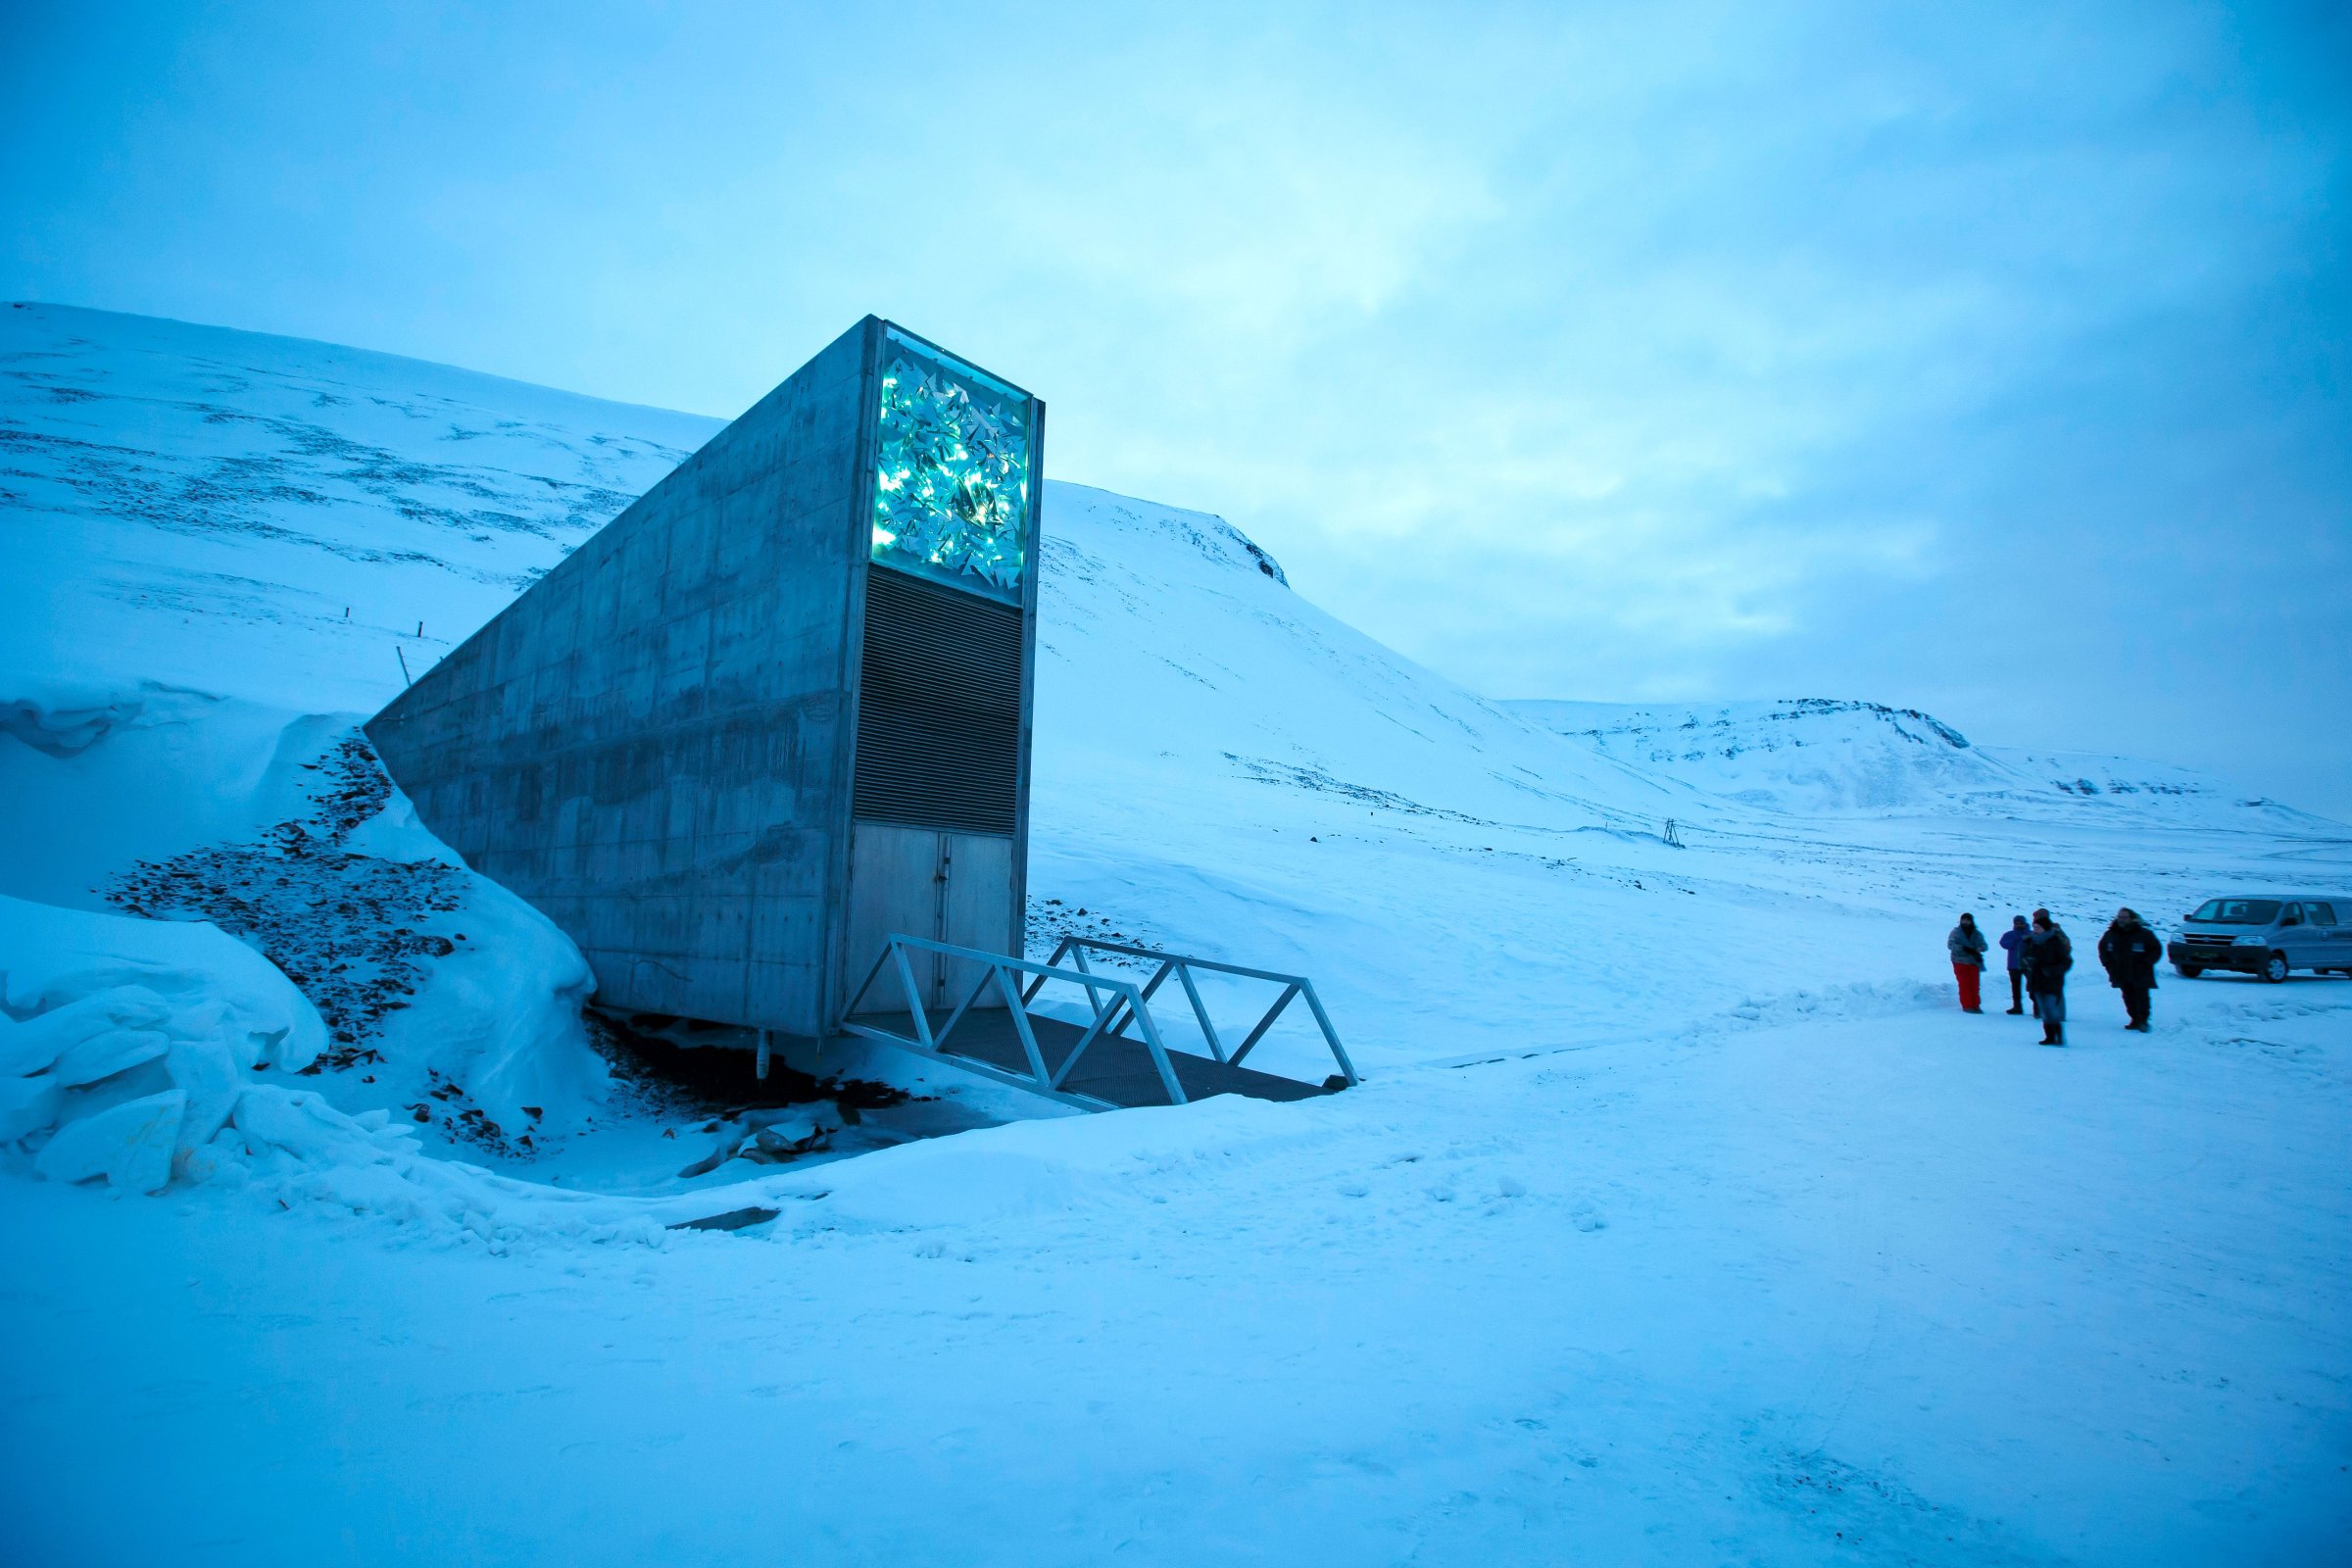 A general view of the entrance of the international gene bank Svalbard Global Seed Vault (SGSV), outside Longyearbyen on Spitsbergen, Norway, on February 29, 2016.